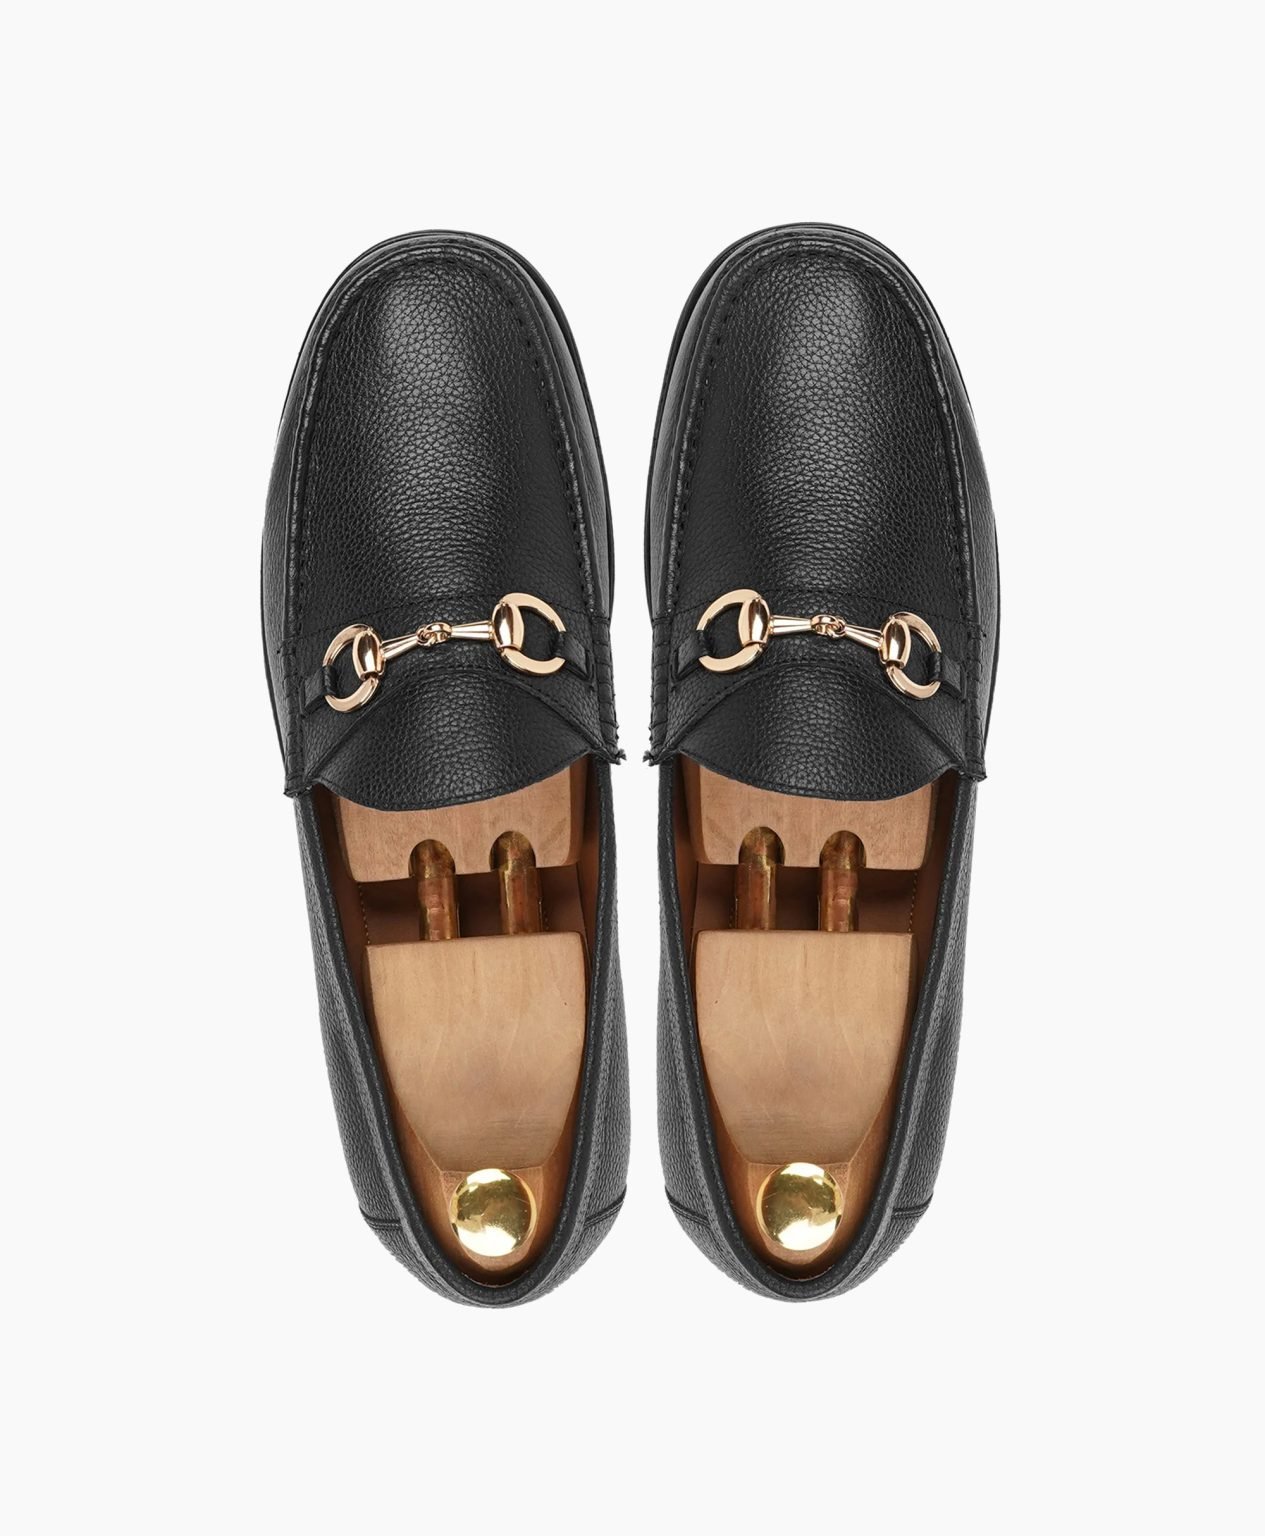 repton-black-leather-loafers-image202